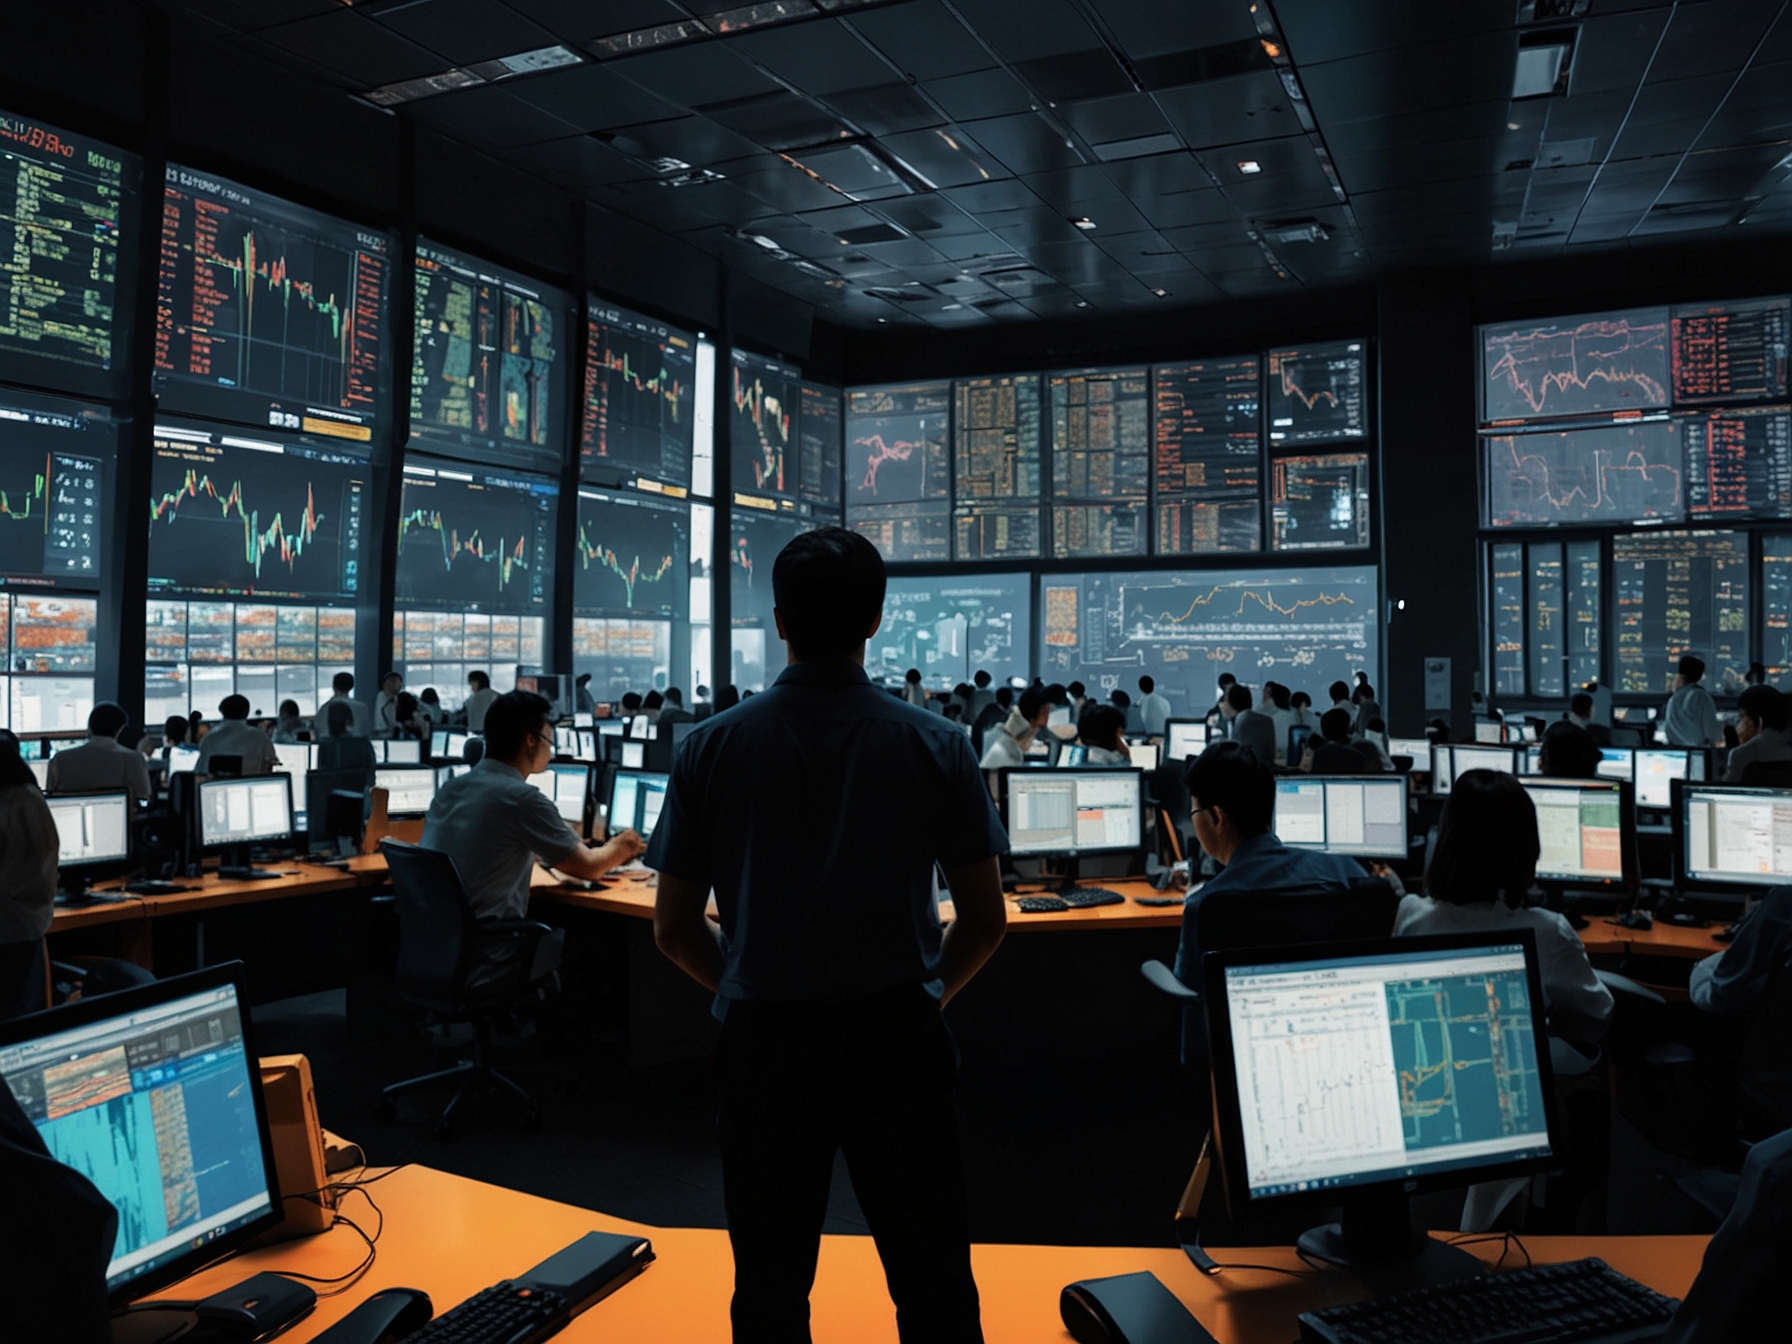 A bustling trading floor at HKEX, filled with screens showing various stock data. This image illustrates the exchange's vibrant trading activities and its response to market volatility and economic indicators.